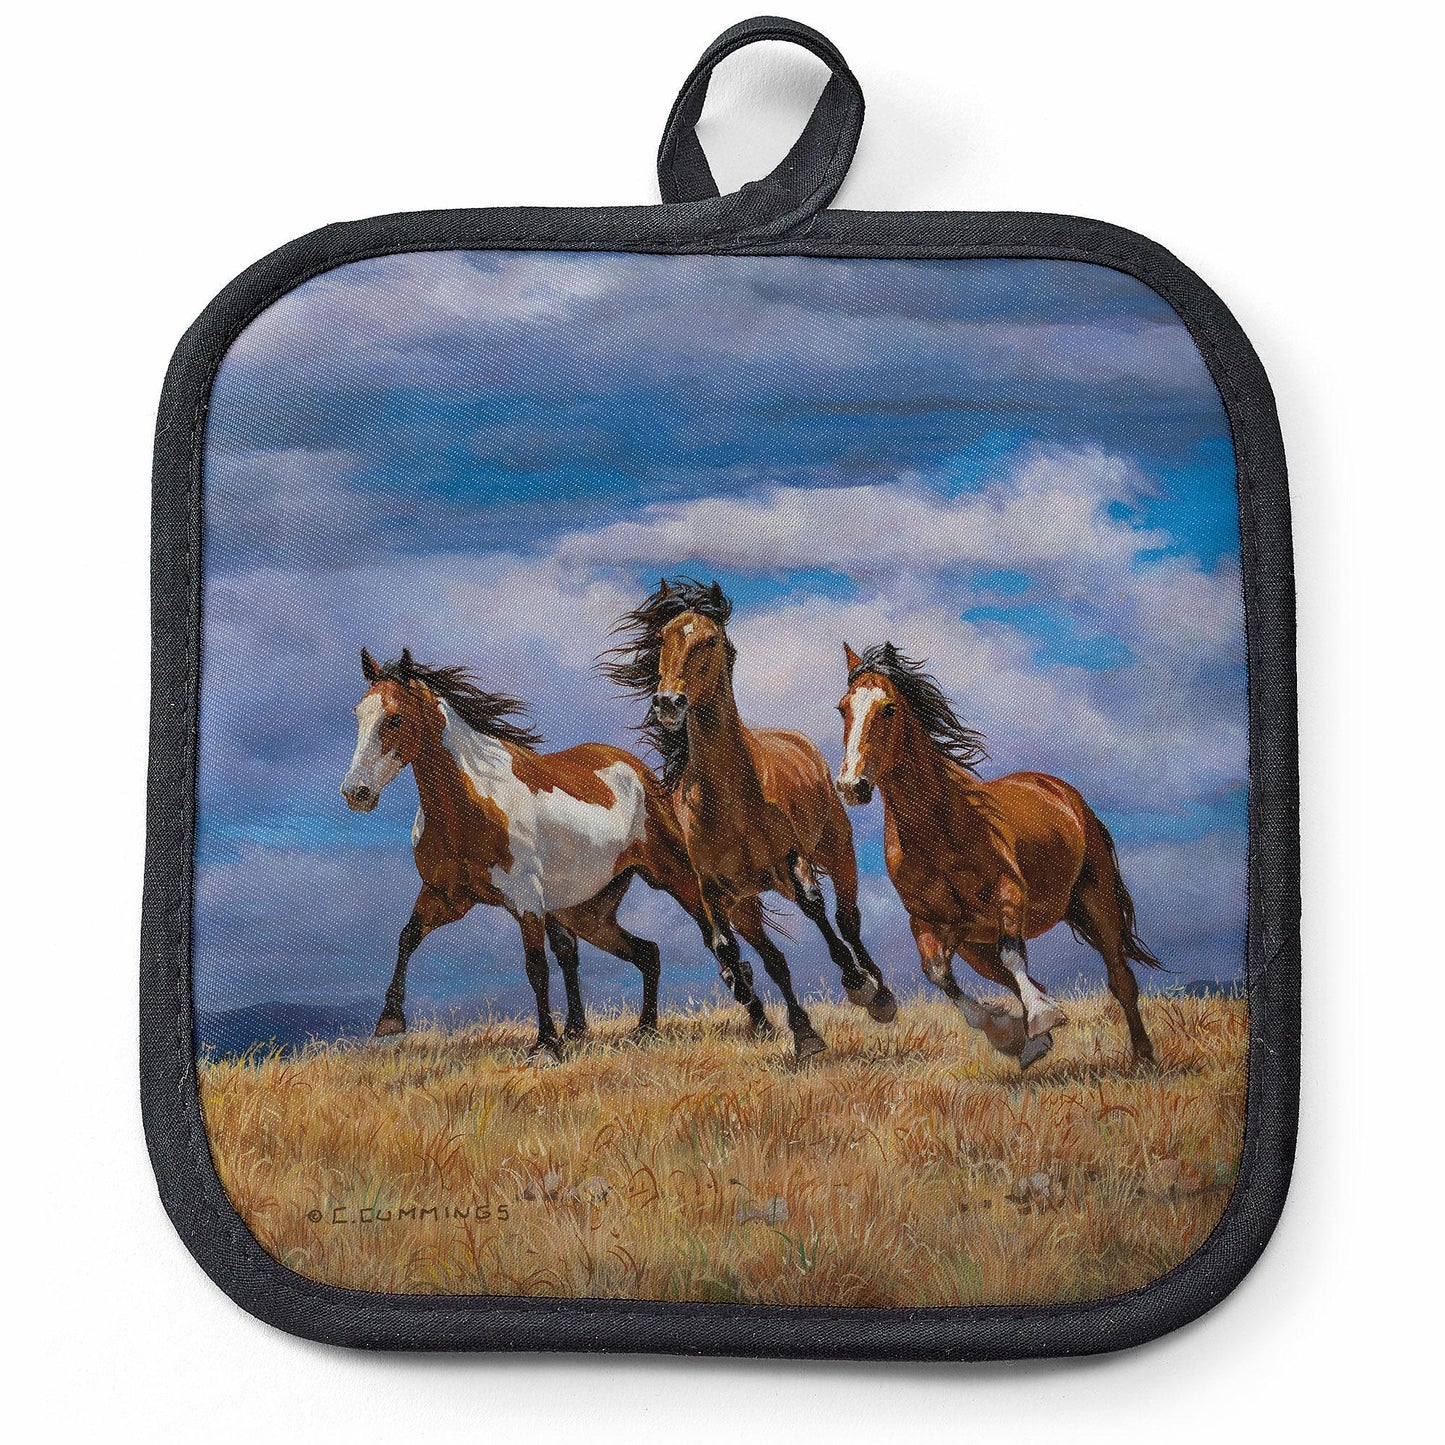 Over the Top - Horses Pot Holder - Wild Wings